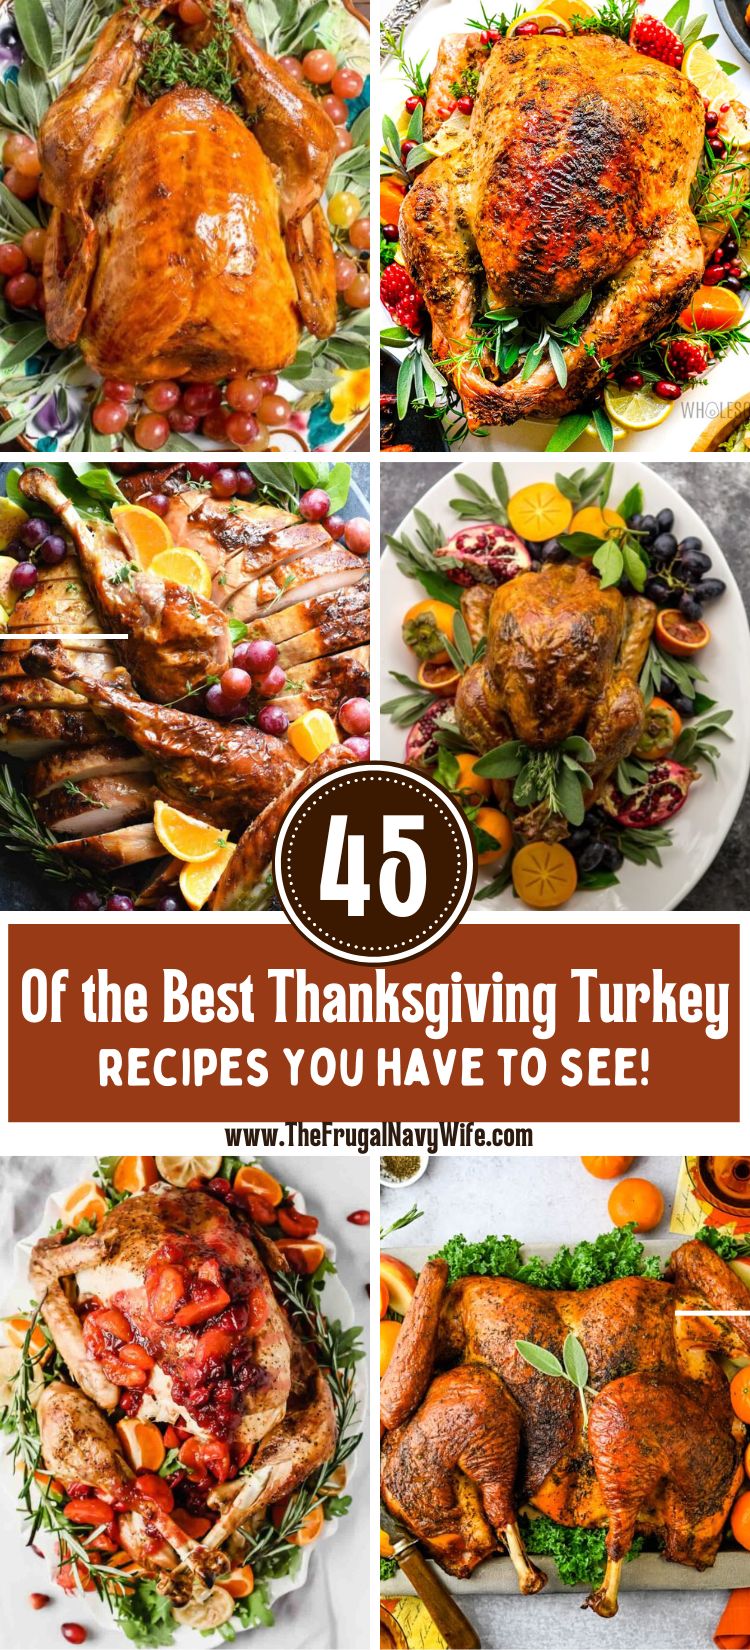 https://www.thefrugalnavywife.com/wp-content/uploads/2019/10/45-of-the-Best-Thanksgiving-Turkey-Recipes-You-Have-to-See.jpg